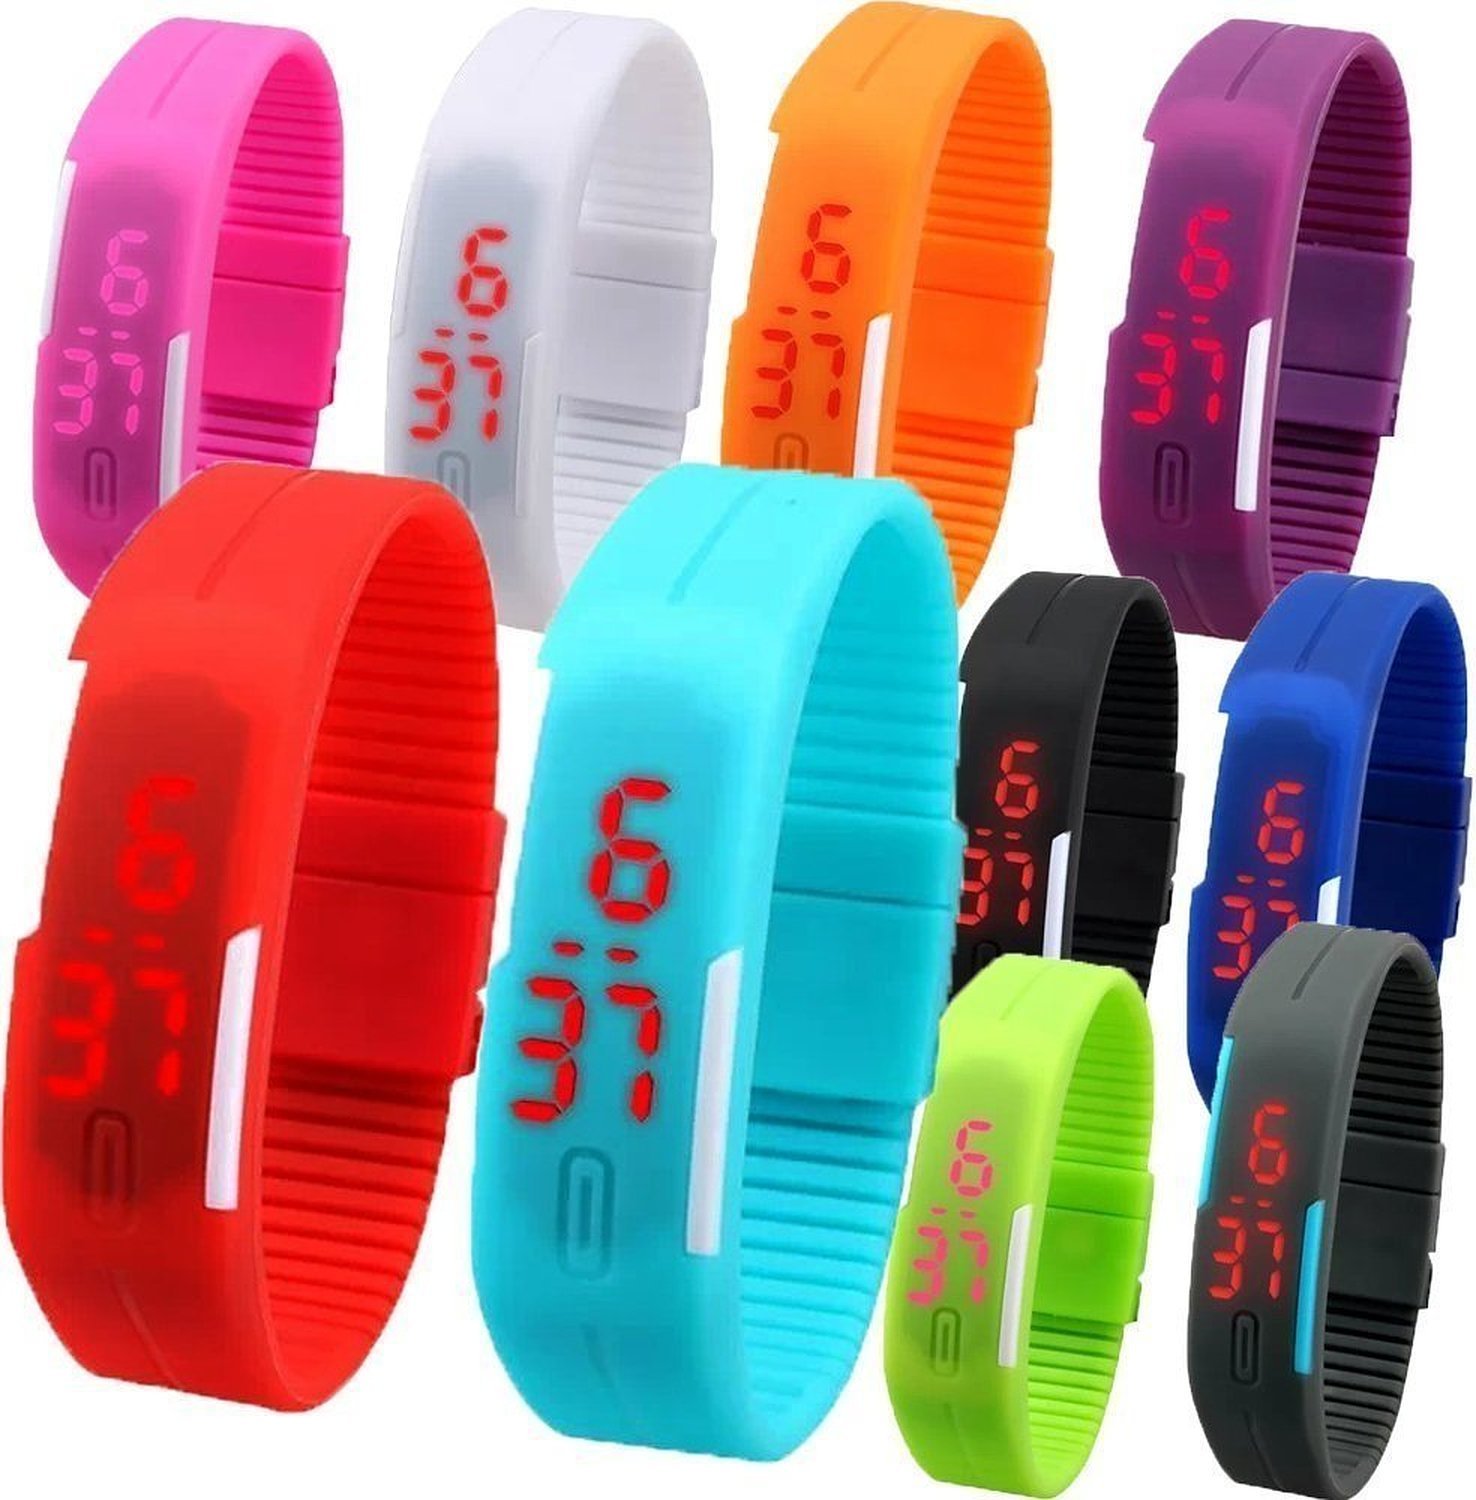 Pappi-Haunt Kids Favourite Sports Pack of 24 Unisex Digital Led Band Watches Quality assured gift items for kids Birthday Party Return Gifts